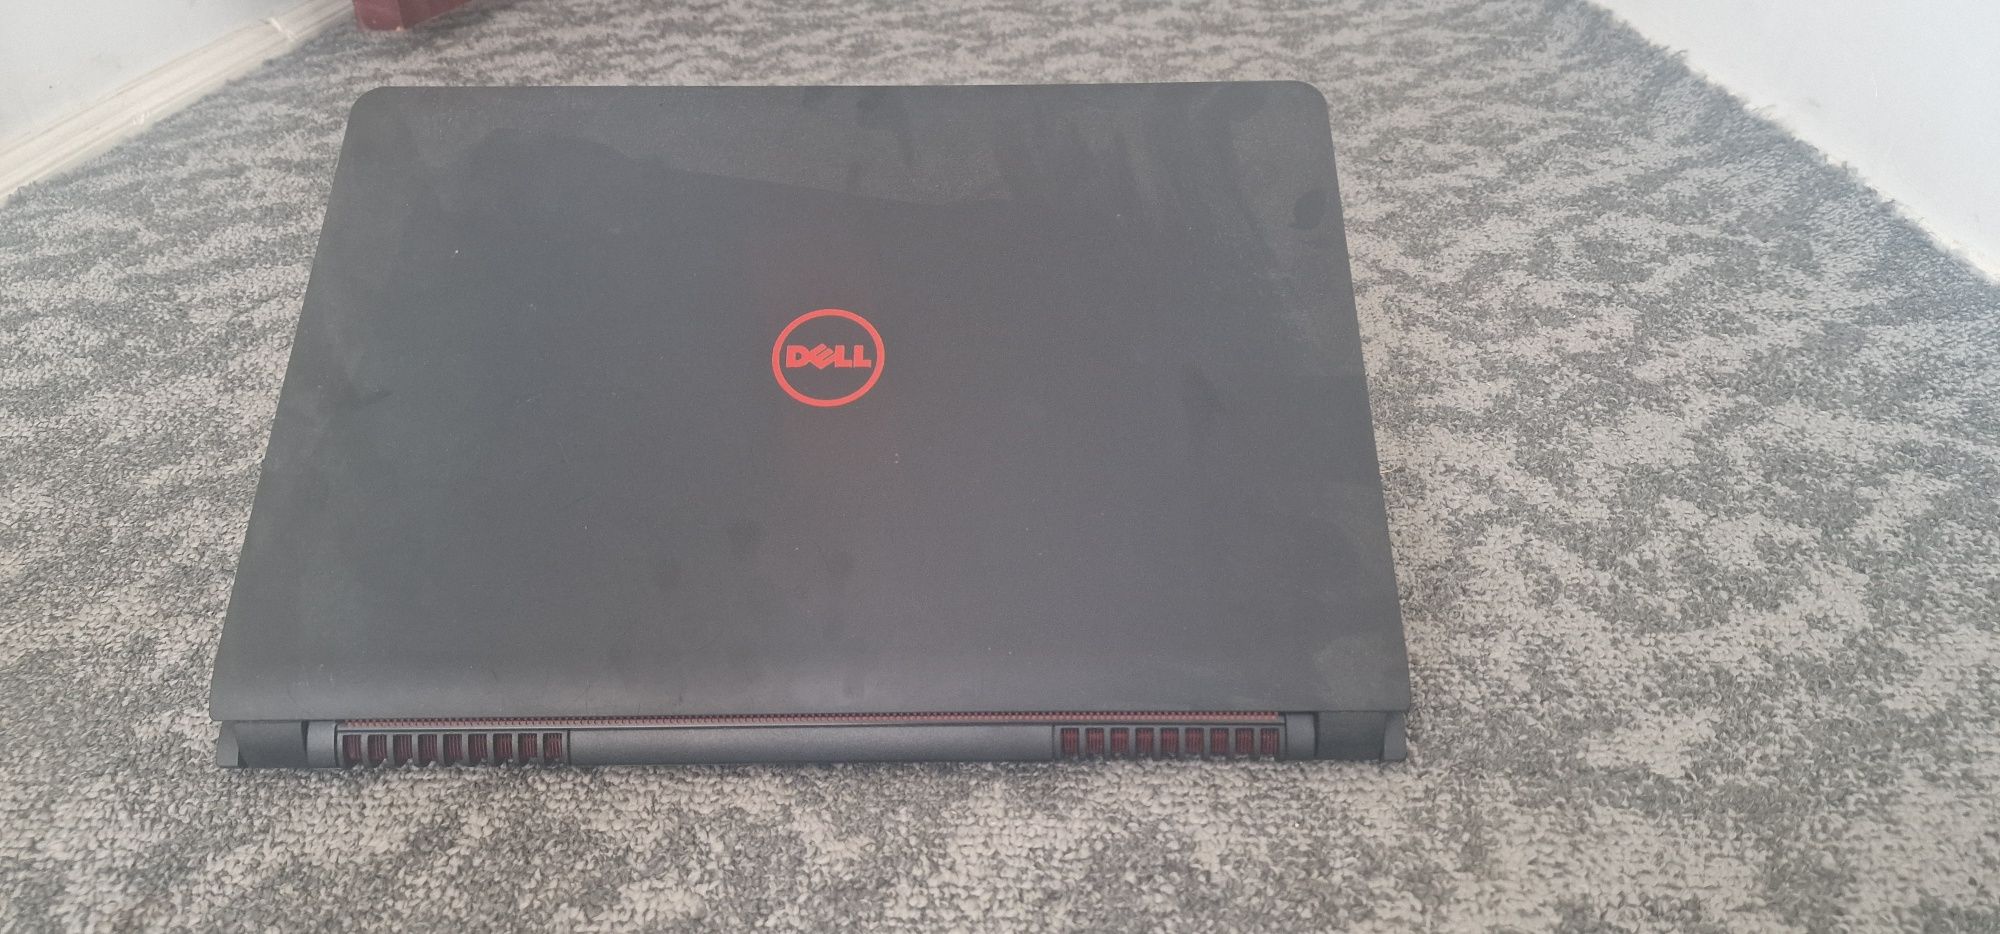 Vând laptop gaming Dell inspiron